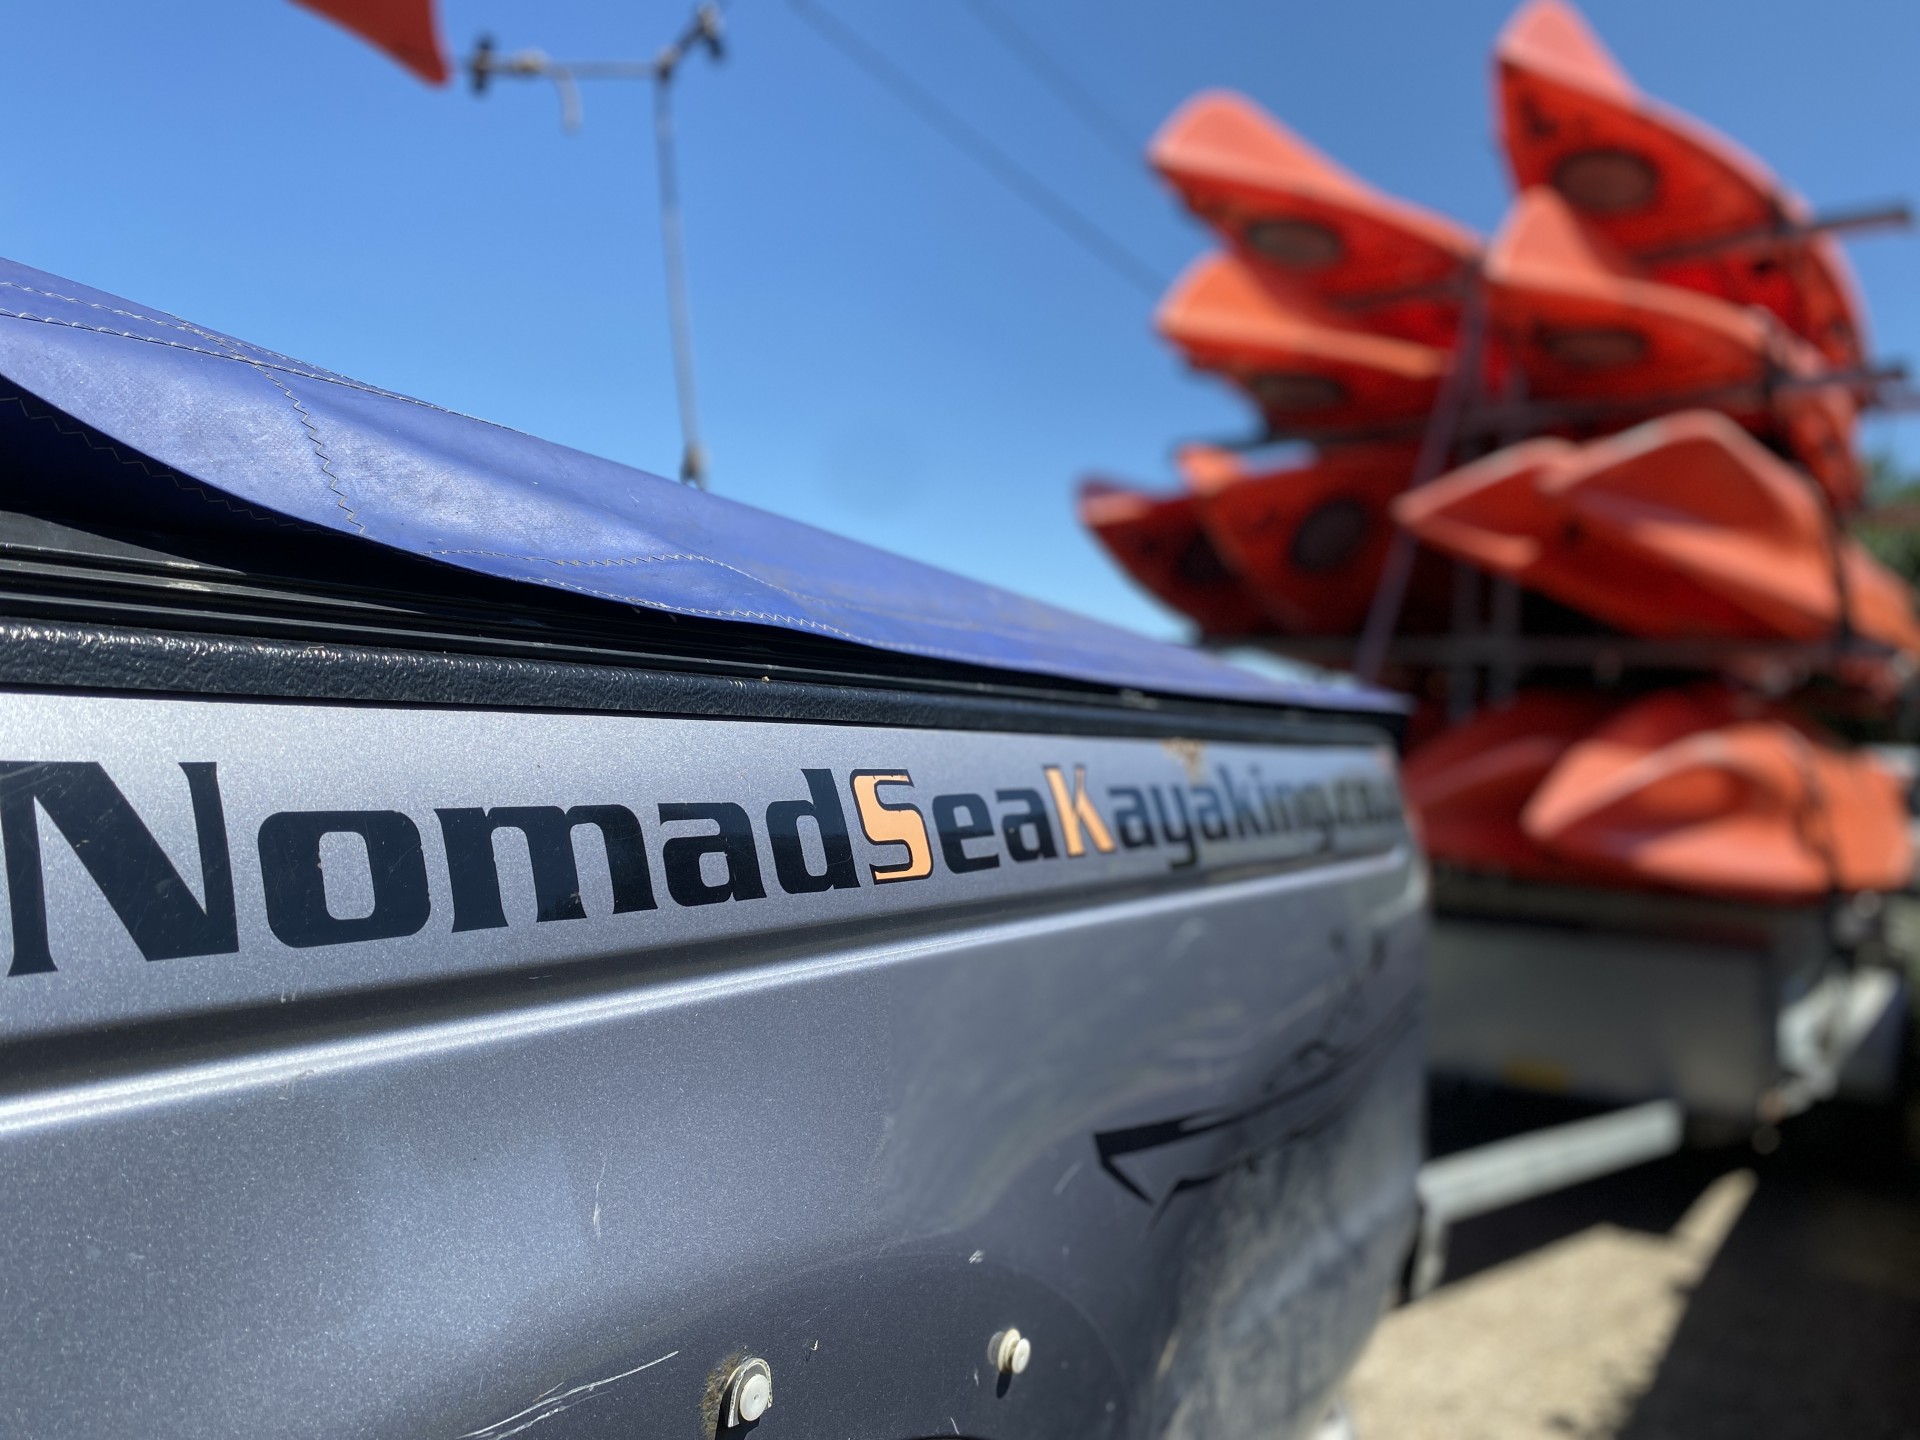 NOMAD Sea Kayaking sit-on-top and decked kayaks ready for our weekend wild camp.